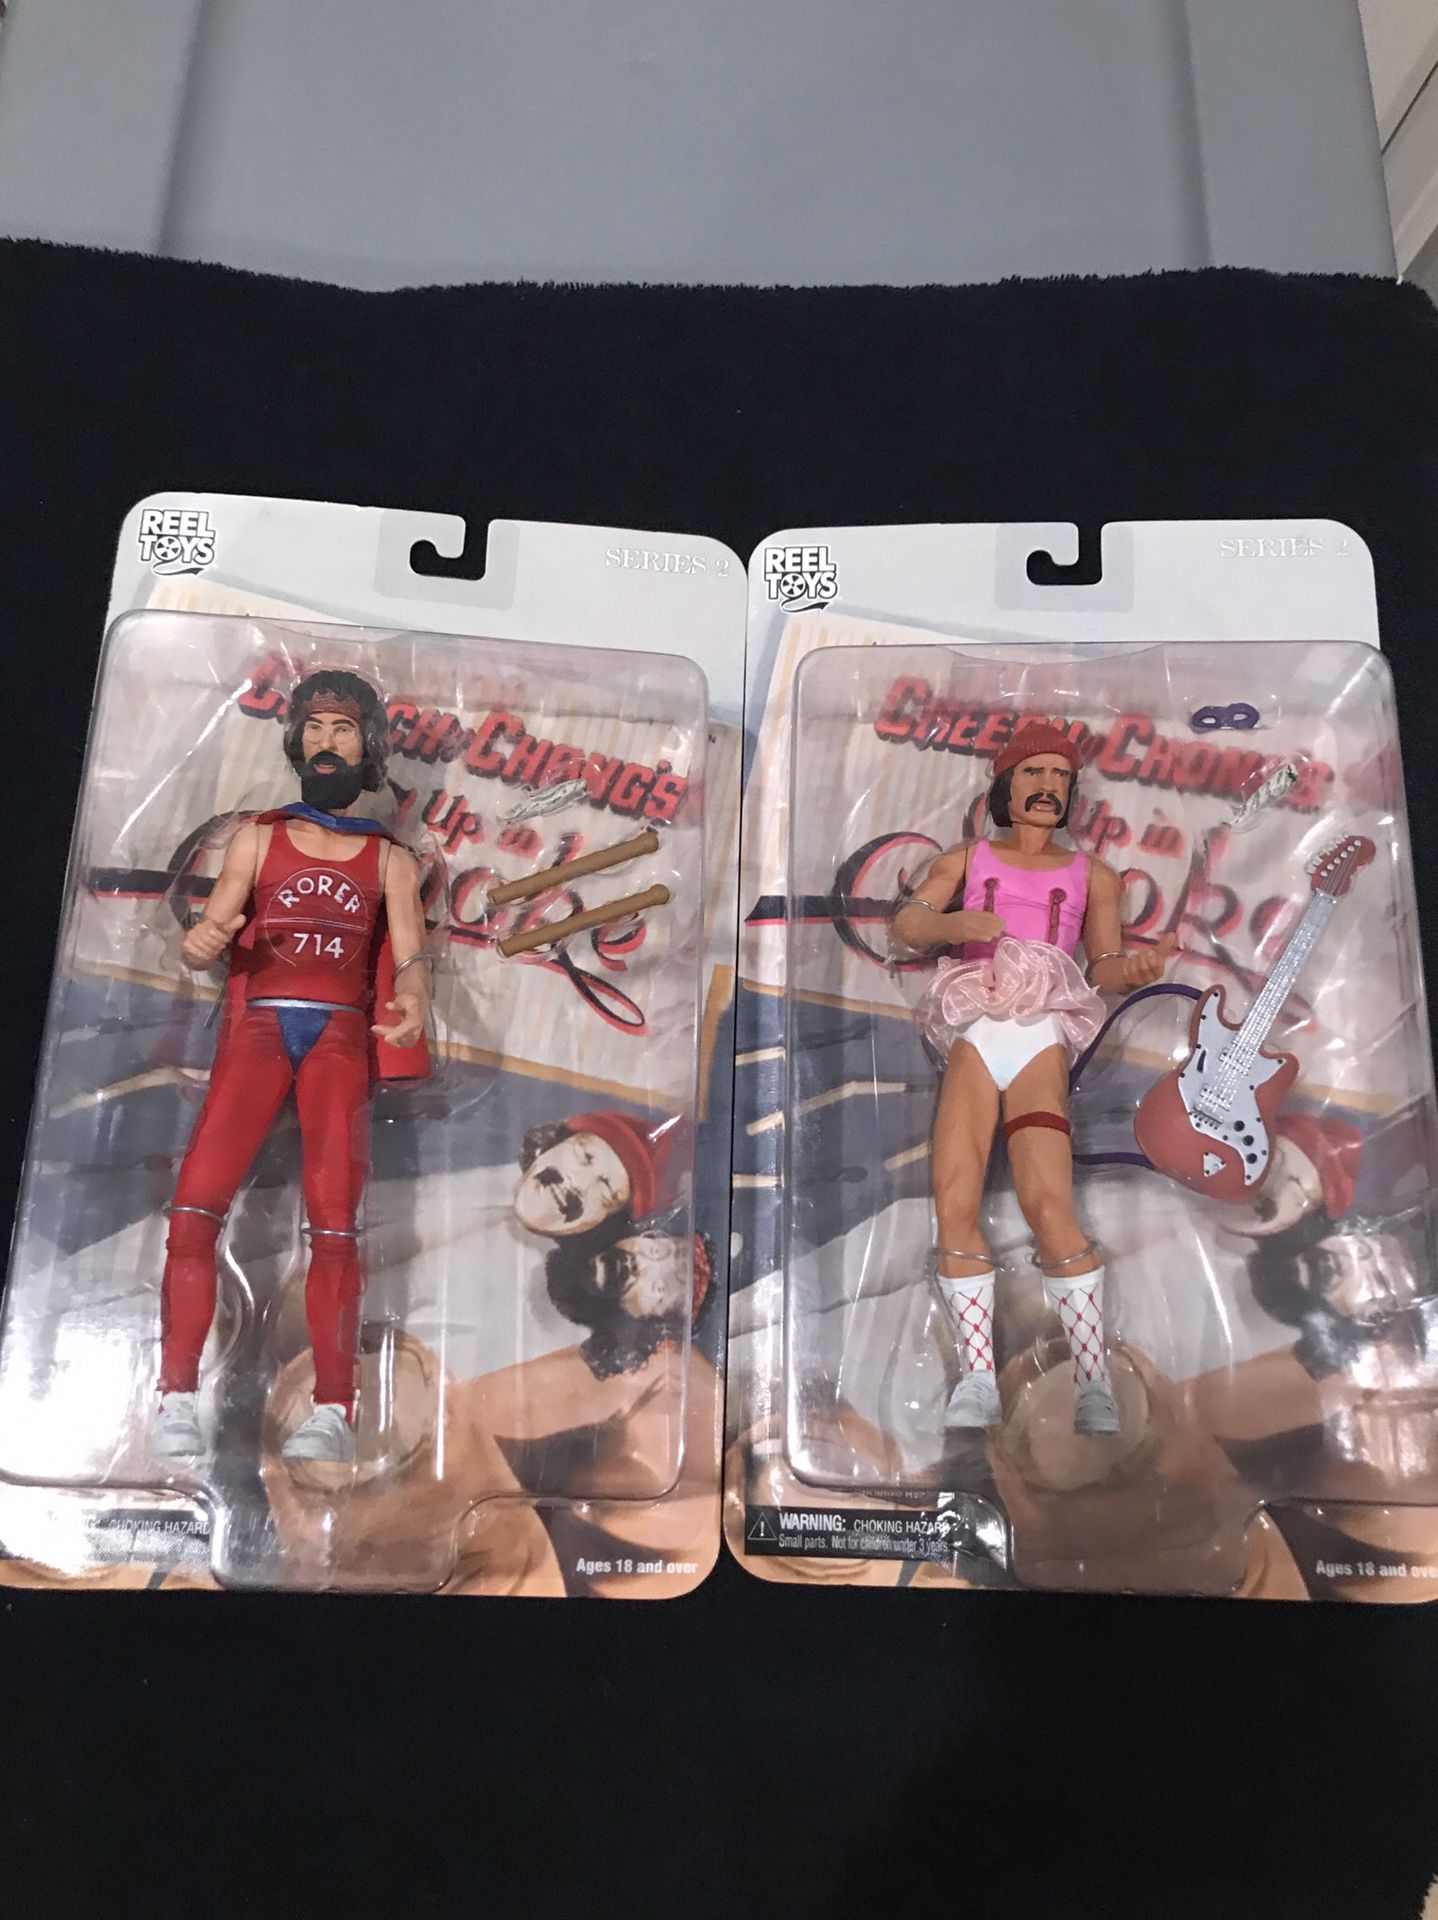 Cheech and Chong up in smoke reel toy figures